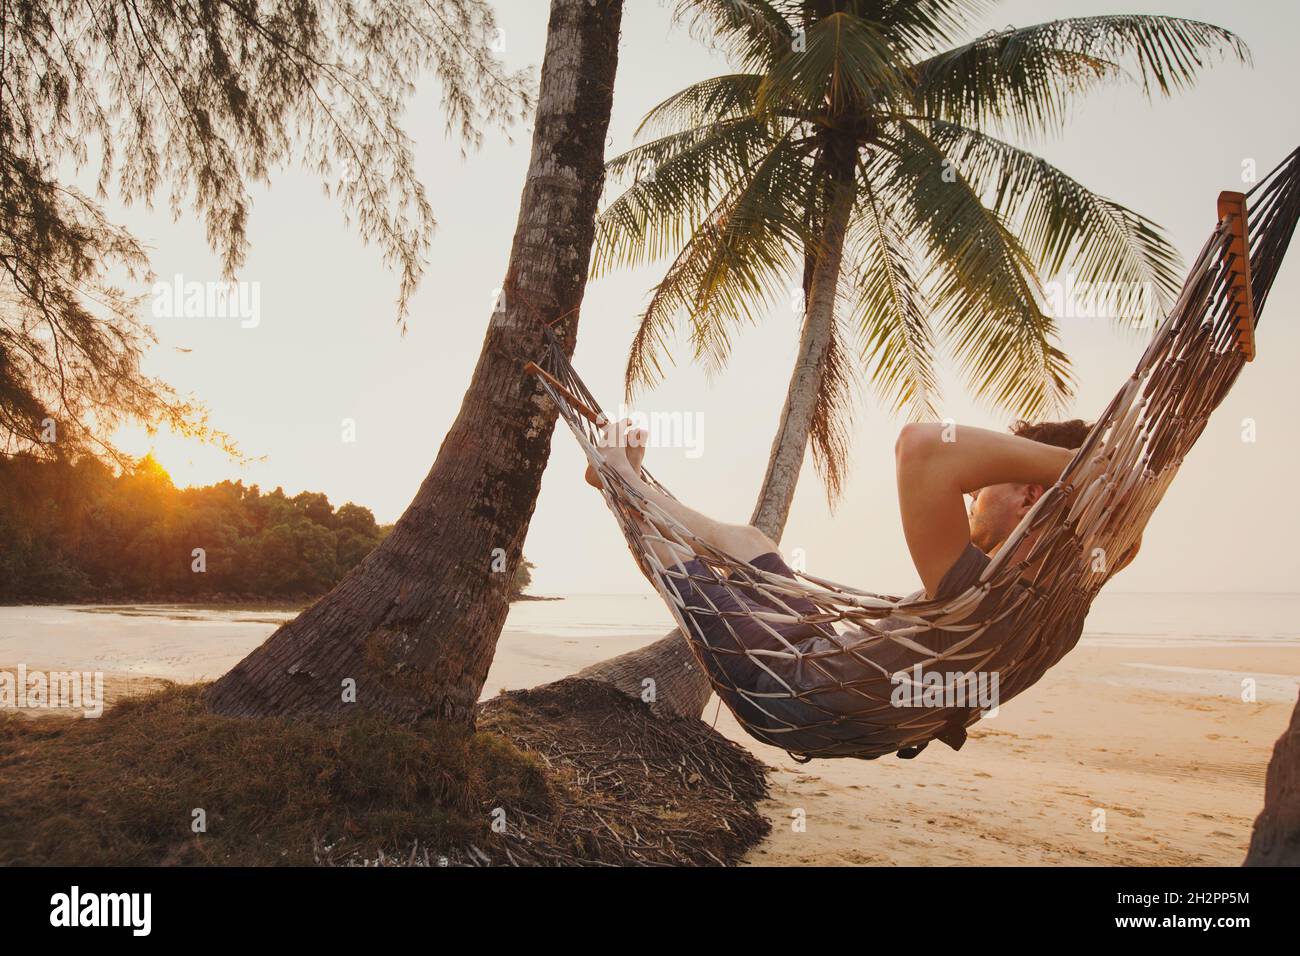 tourist relaxing in hammock on tropical beach with coconut palm trees, relaxation and leisure tourism Stock Photo